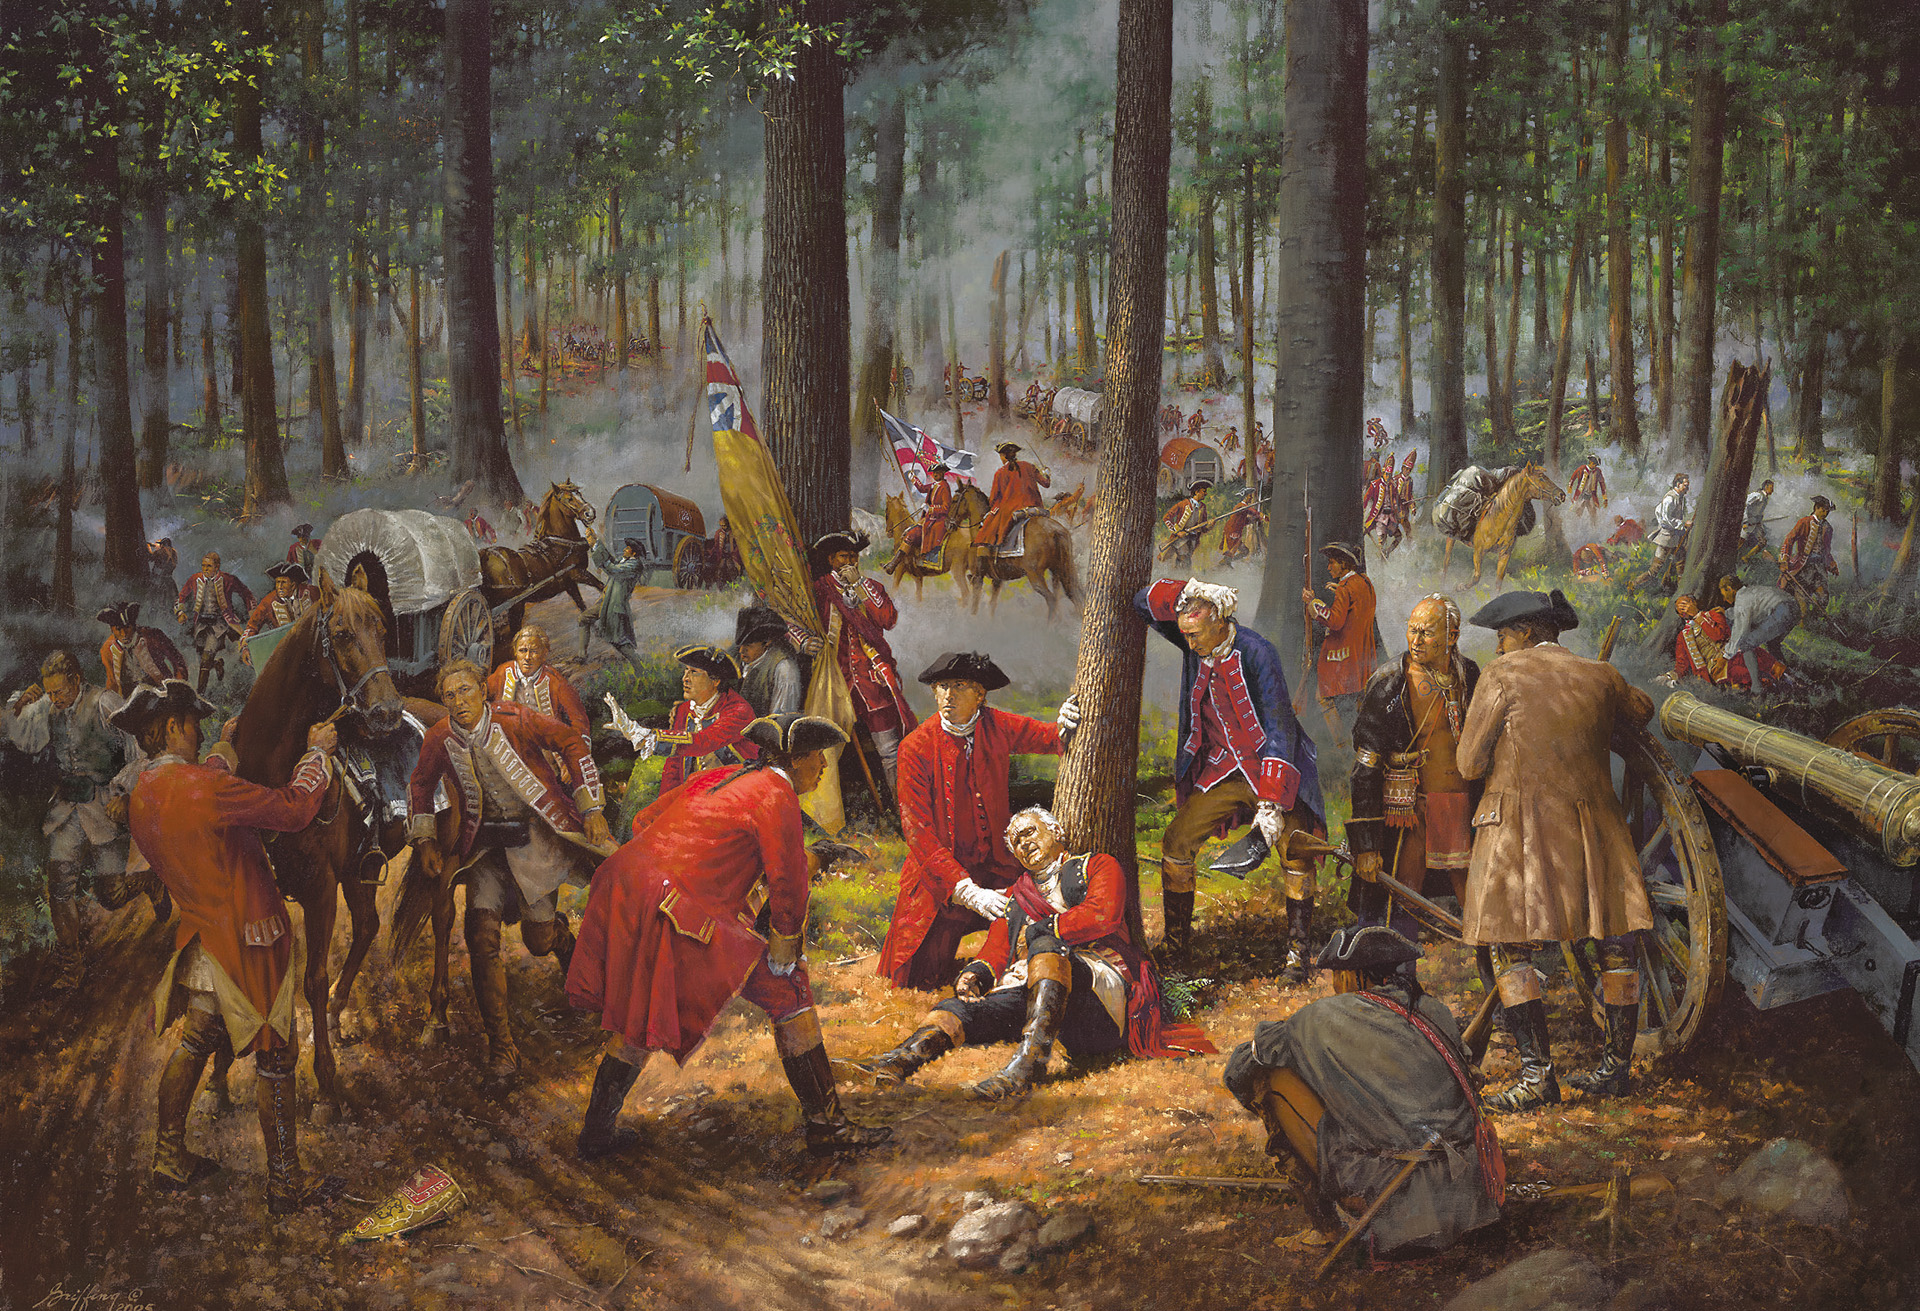 Lieutenant Colonel George Washington kneels next to mortally wounded Maj. Gen. Edward Braddock during the height of the backwoods battle against the French and Indians in a painting by Robert Griffing. Although Braddock had posted flank guards, they were overwhelmed by the Indians.